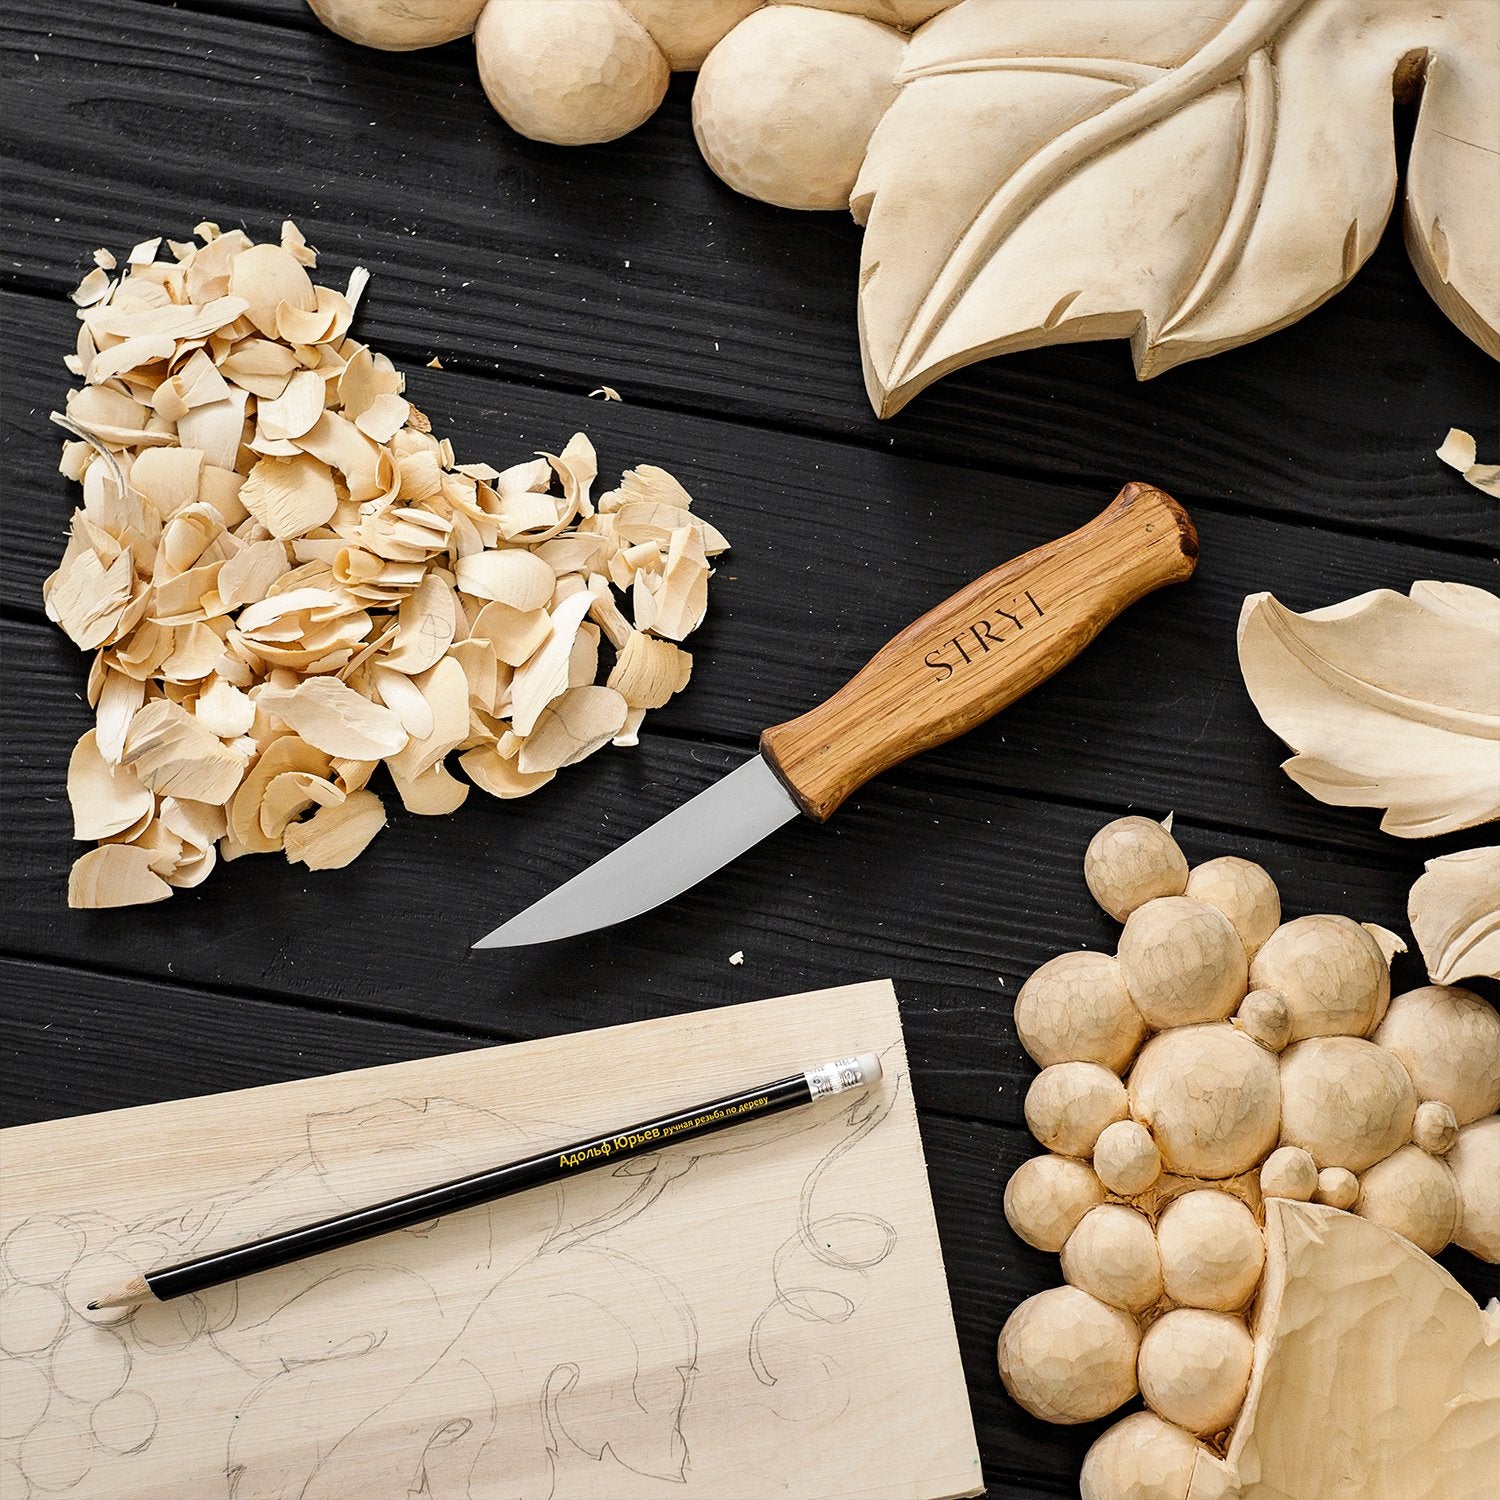 Professional Wood Carving Tools: Sloyd Whittling All Purpose Carving Knife